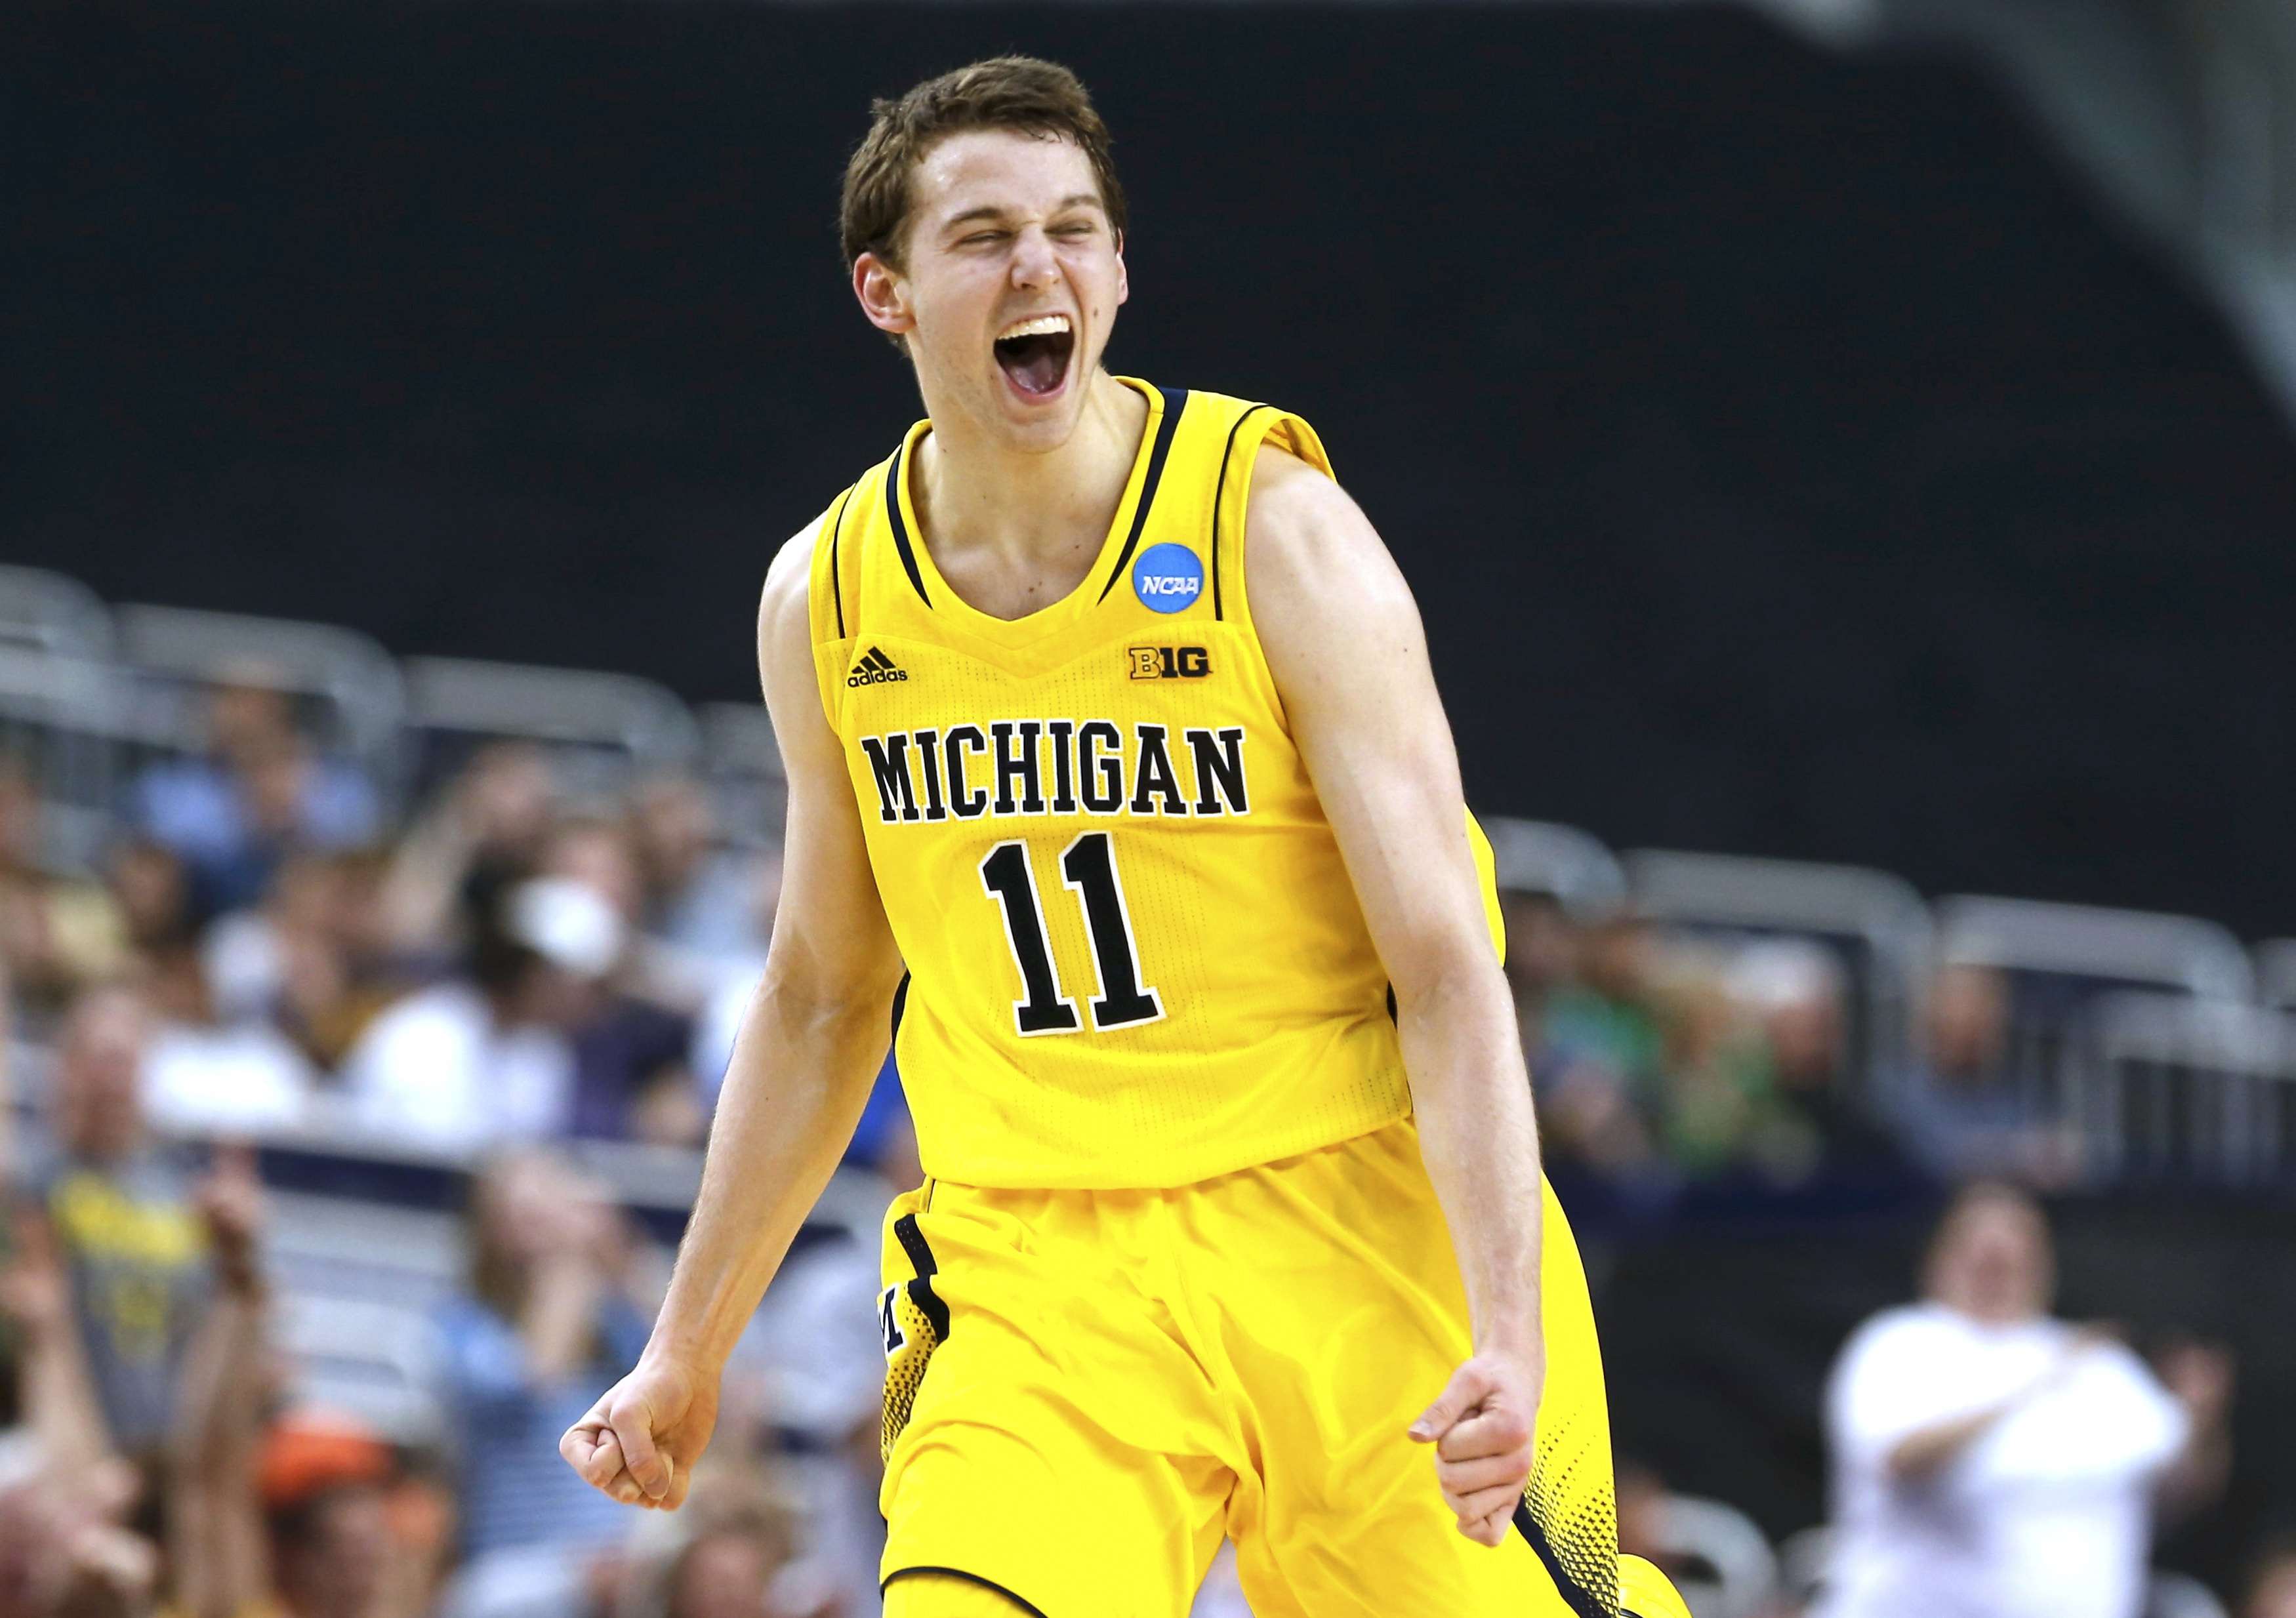 Celtics reportedly sign Nik Stauskas to two-year deal